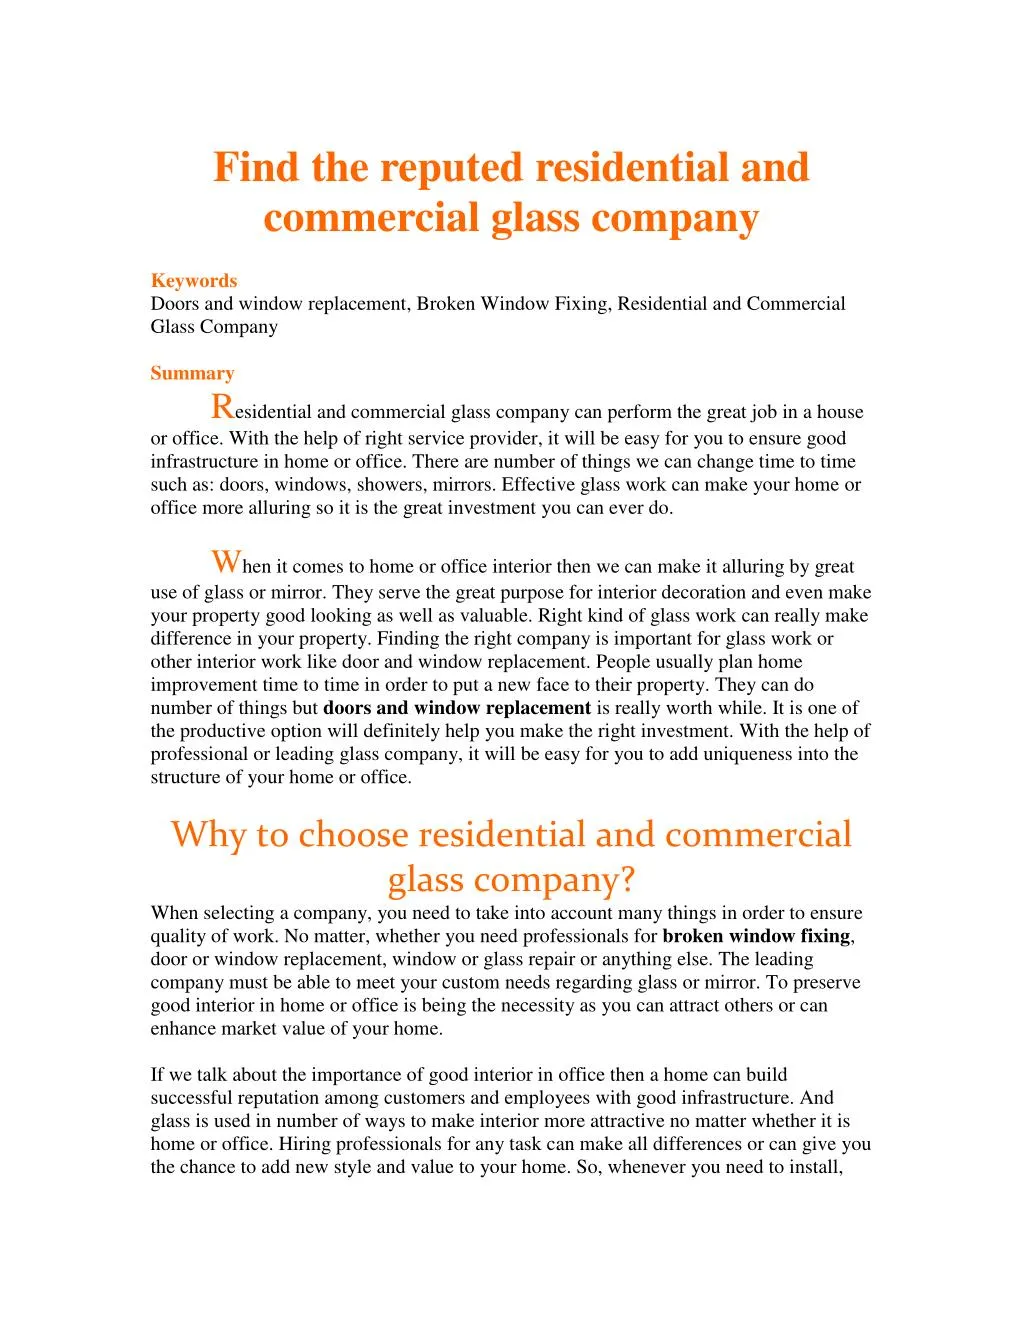 find the reputed residential and commercial glass